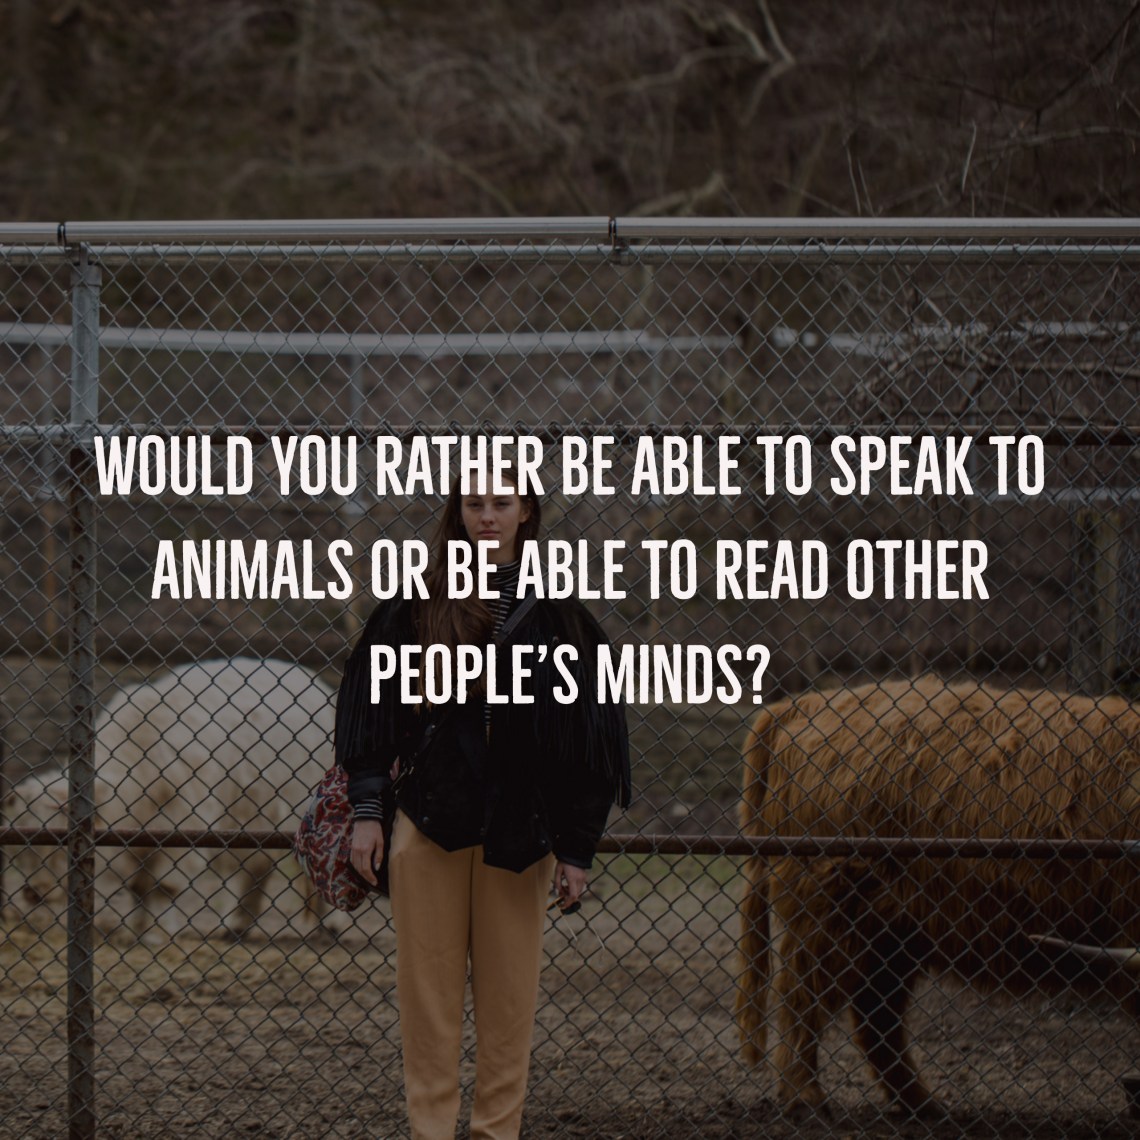 17 People Share Their Hardest 'Would You Rather' Question